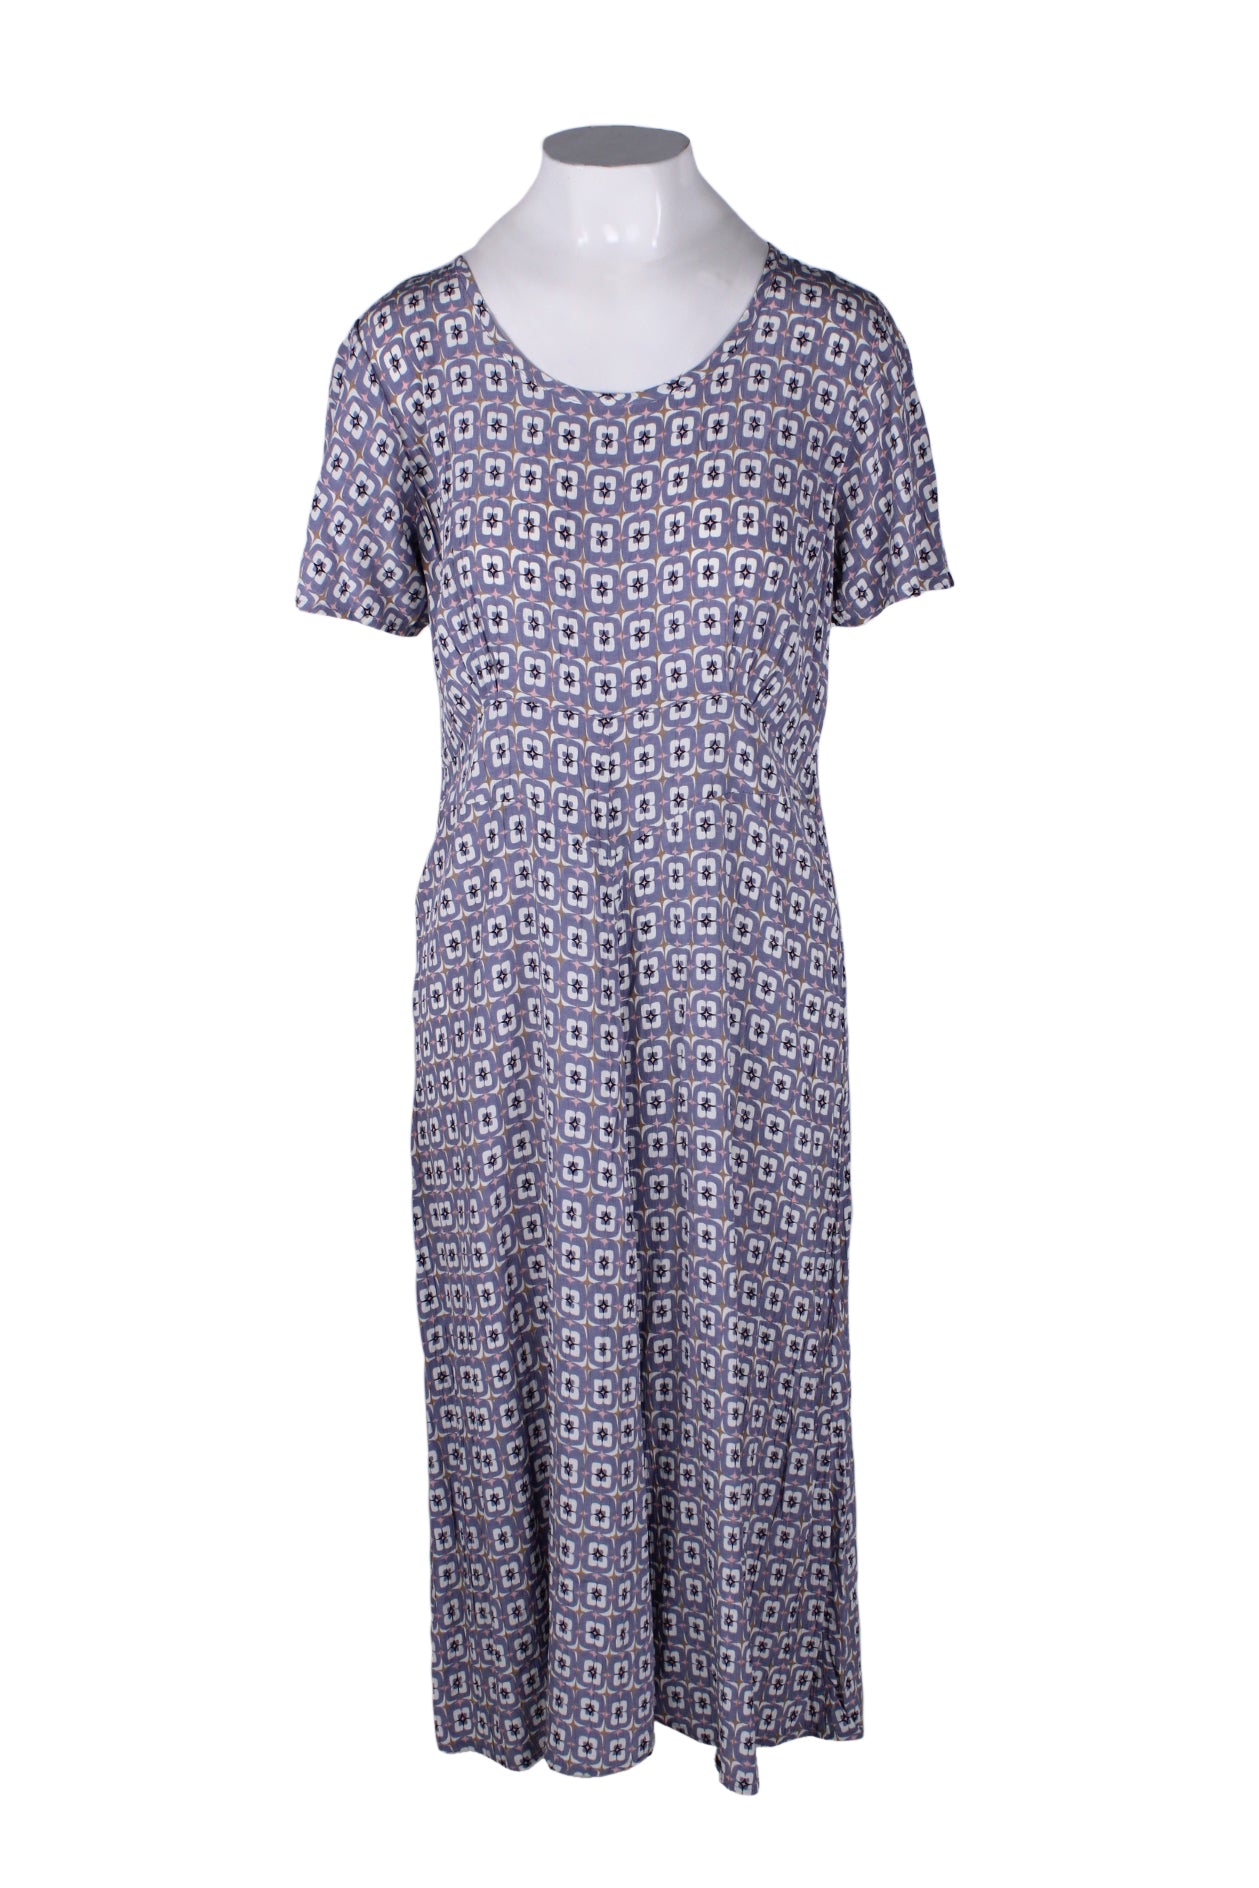 flax light purple maxi dress. features rounded neckline, pink sparkle with repeating lilac and white print throughout, crinkled silk texture lasticized waist, and pull on style. 